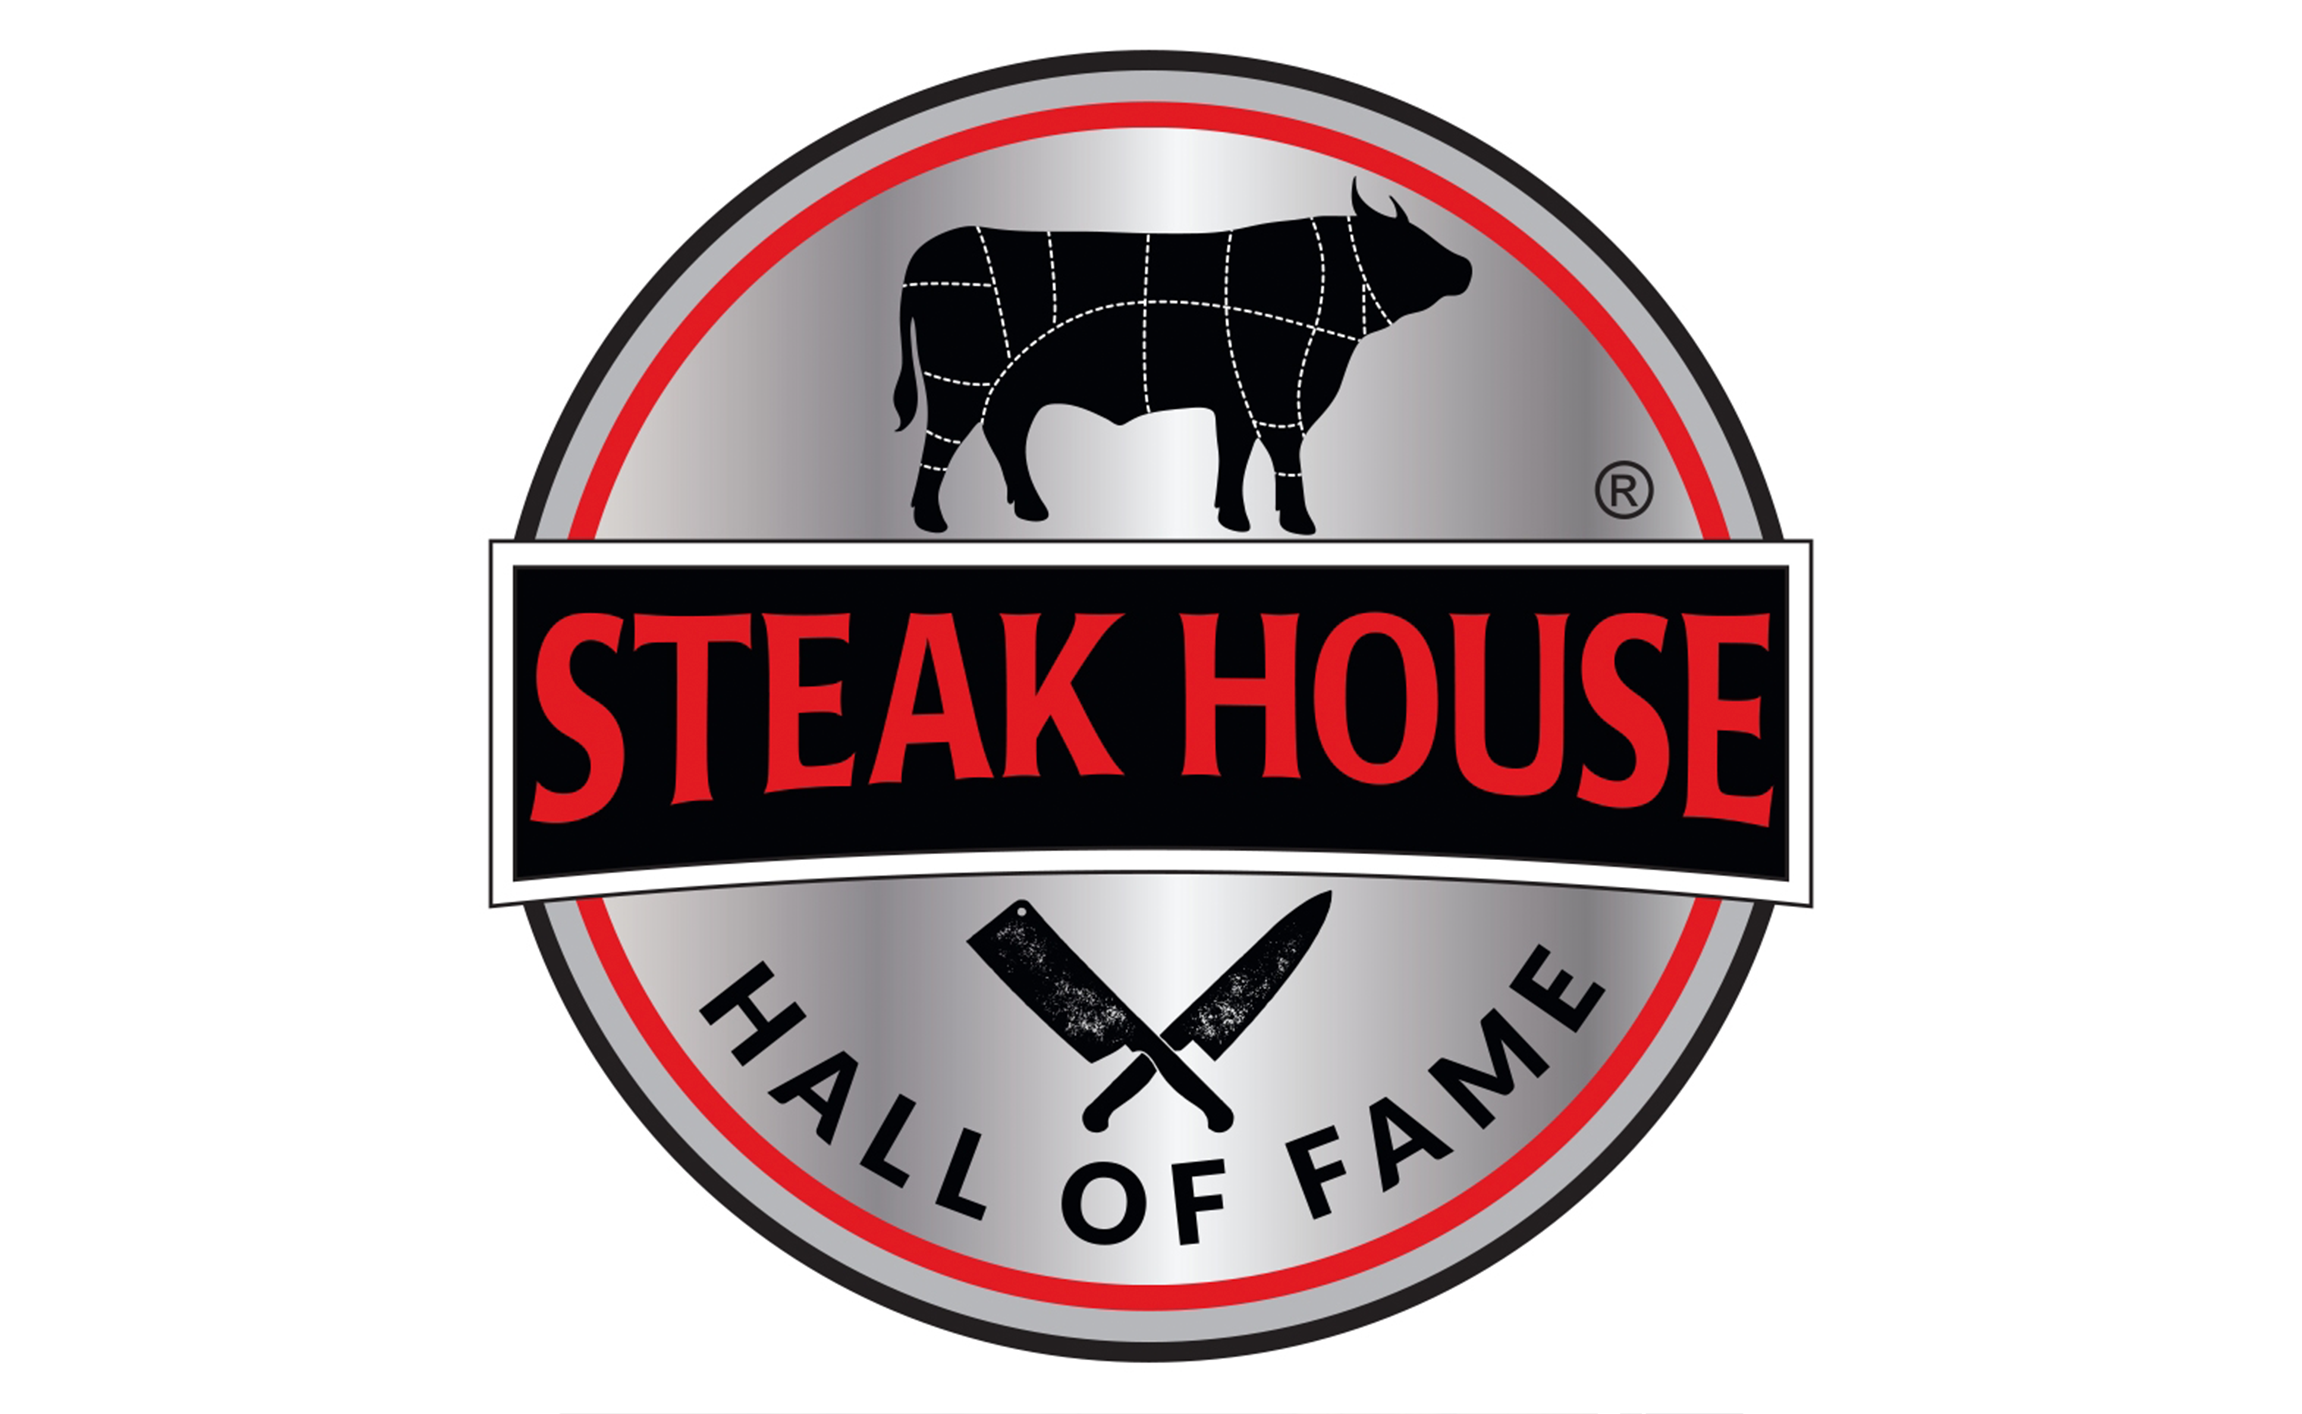 National Steak House Hall of Fame